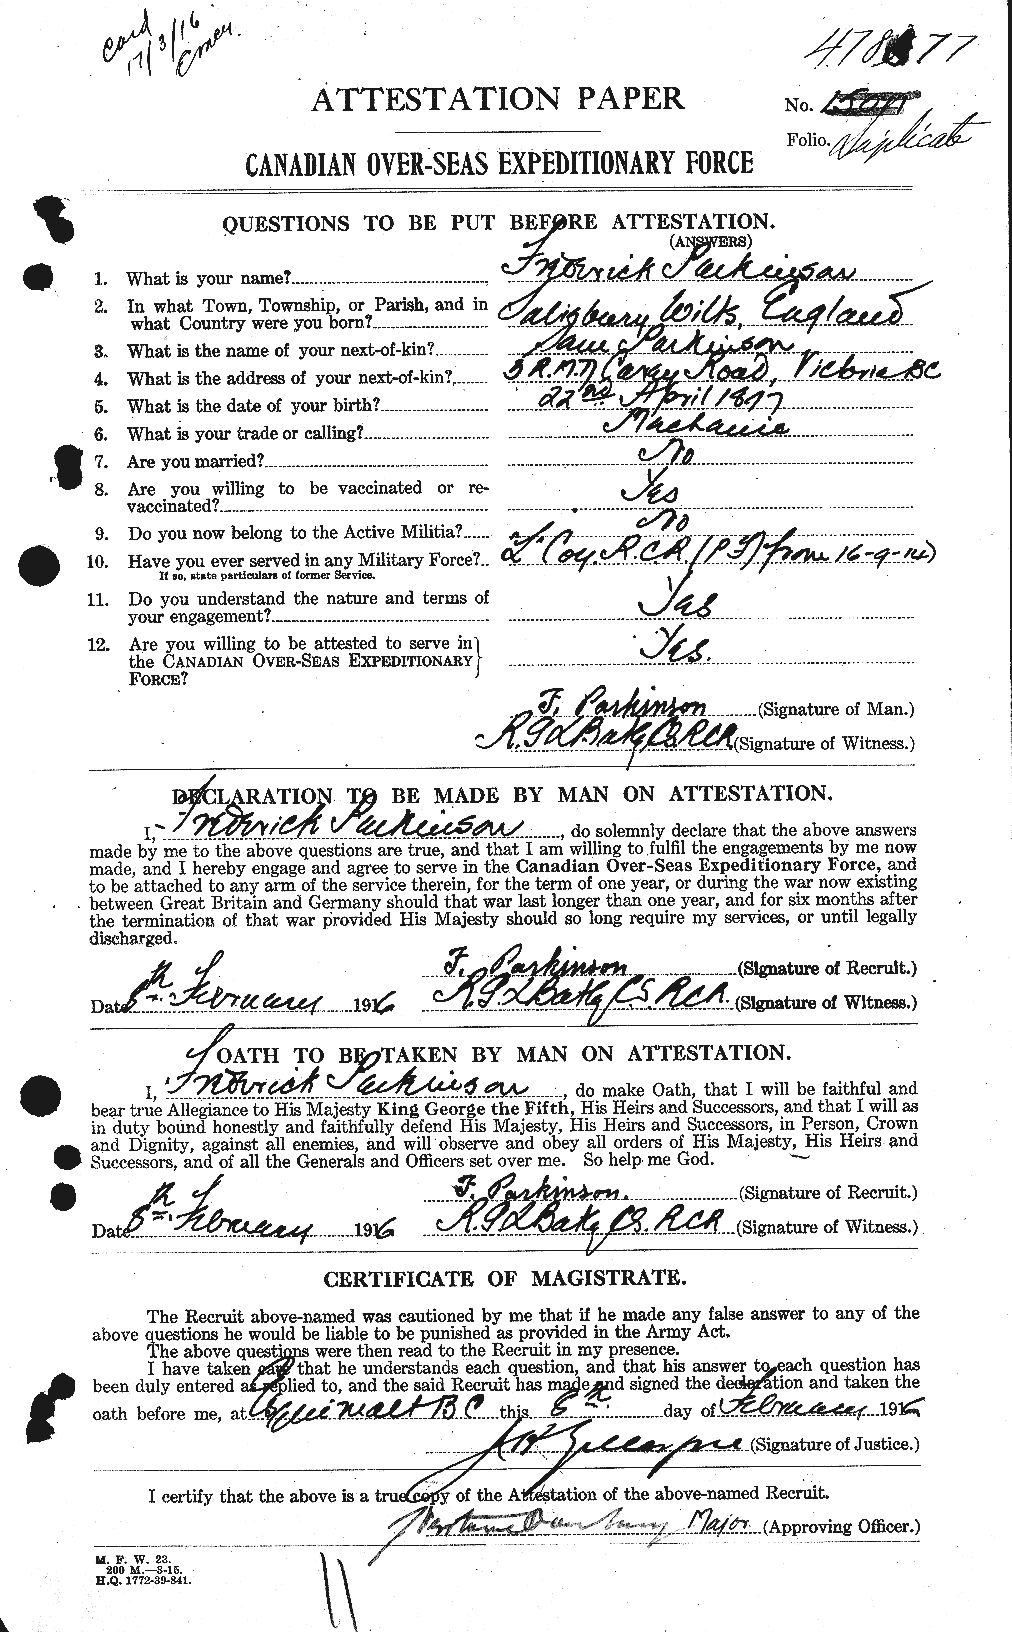 Personnel Records of the First World War - CEF 565990a